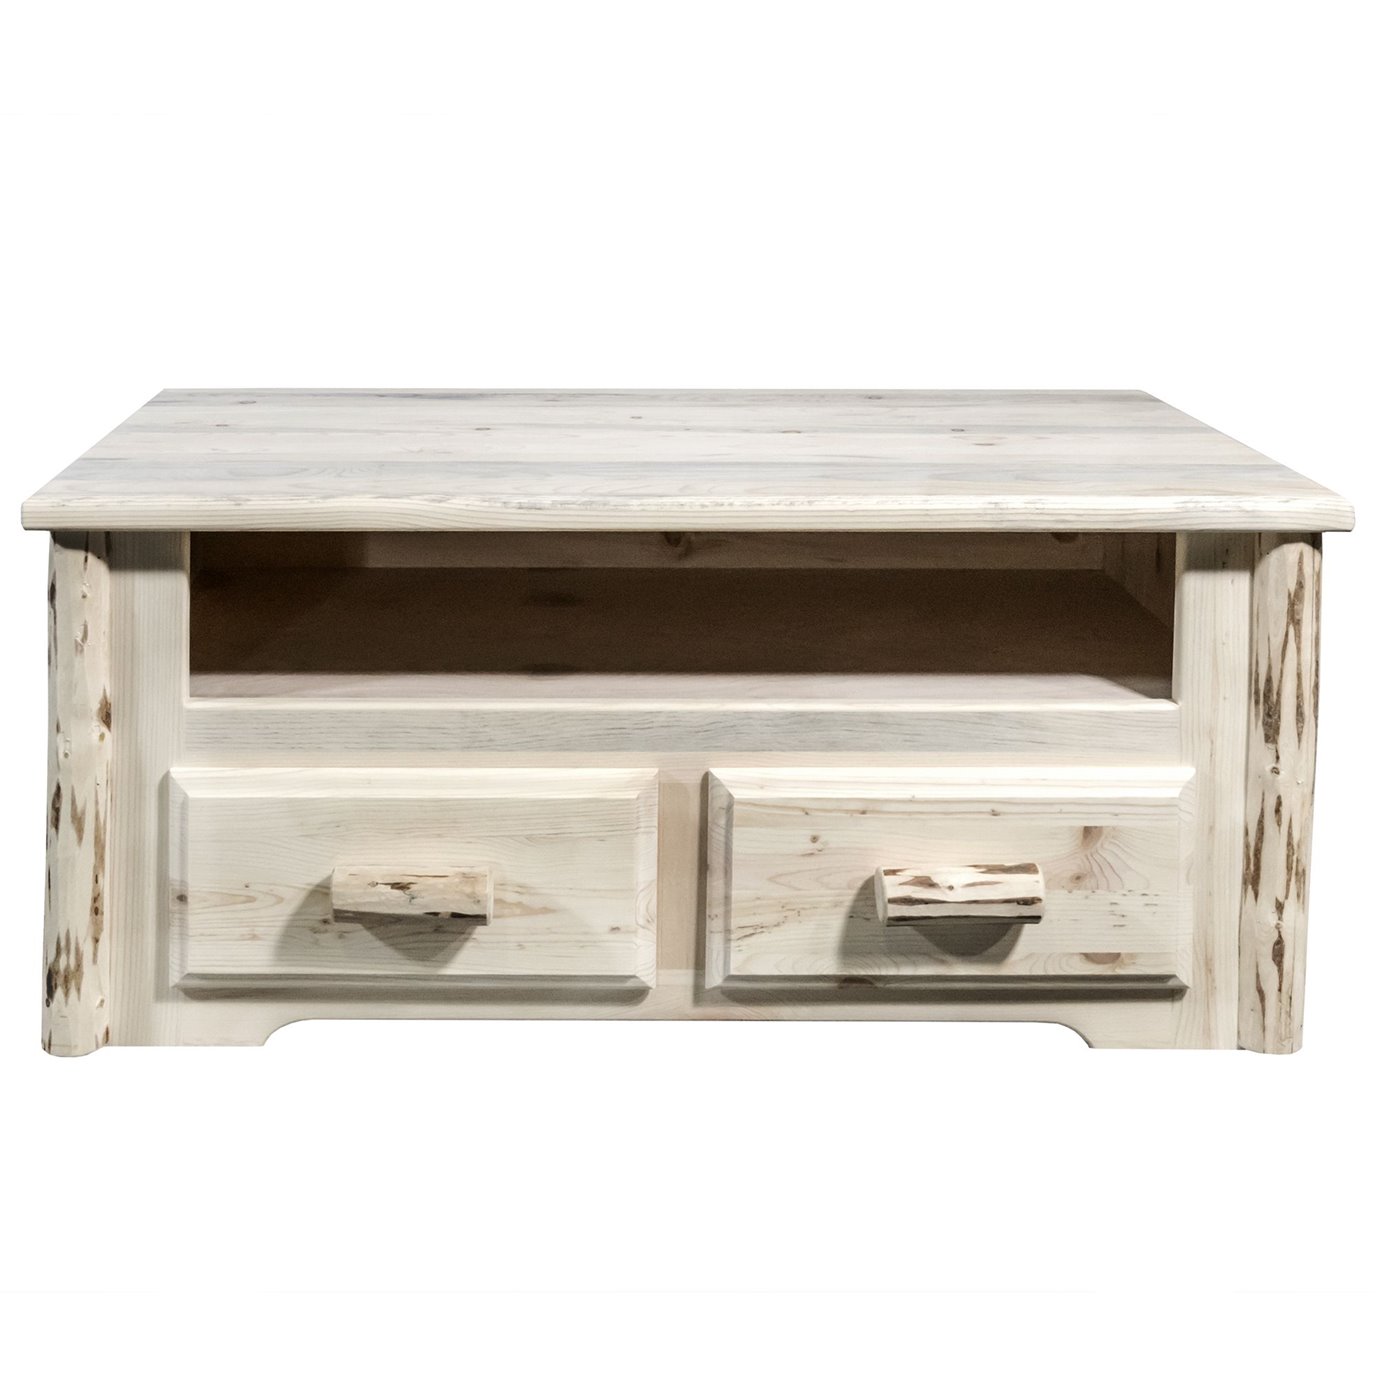 Montana Coffee Table w/ 2 Drawers - Clear Lacquer Finish